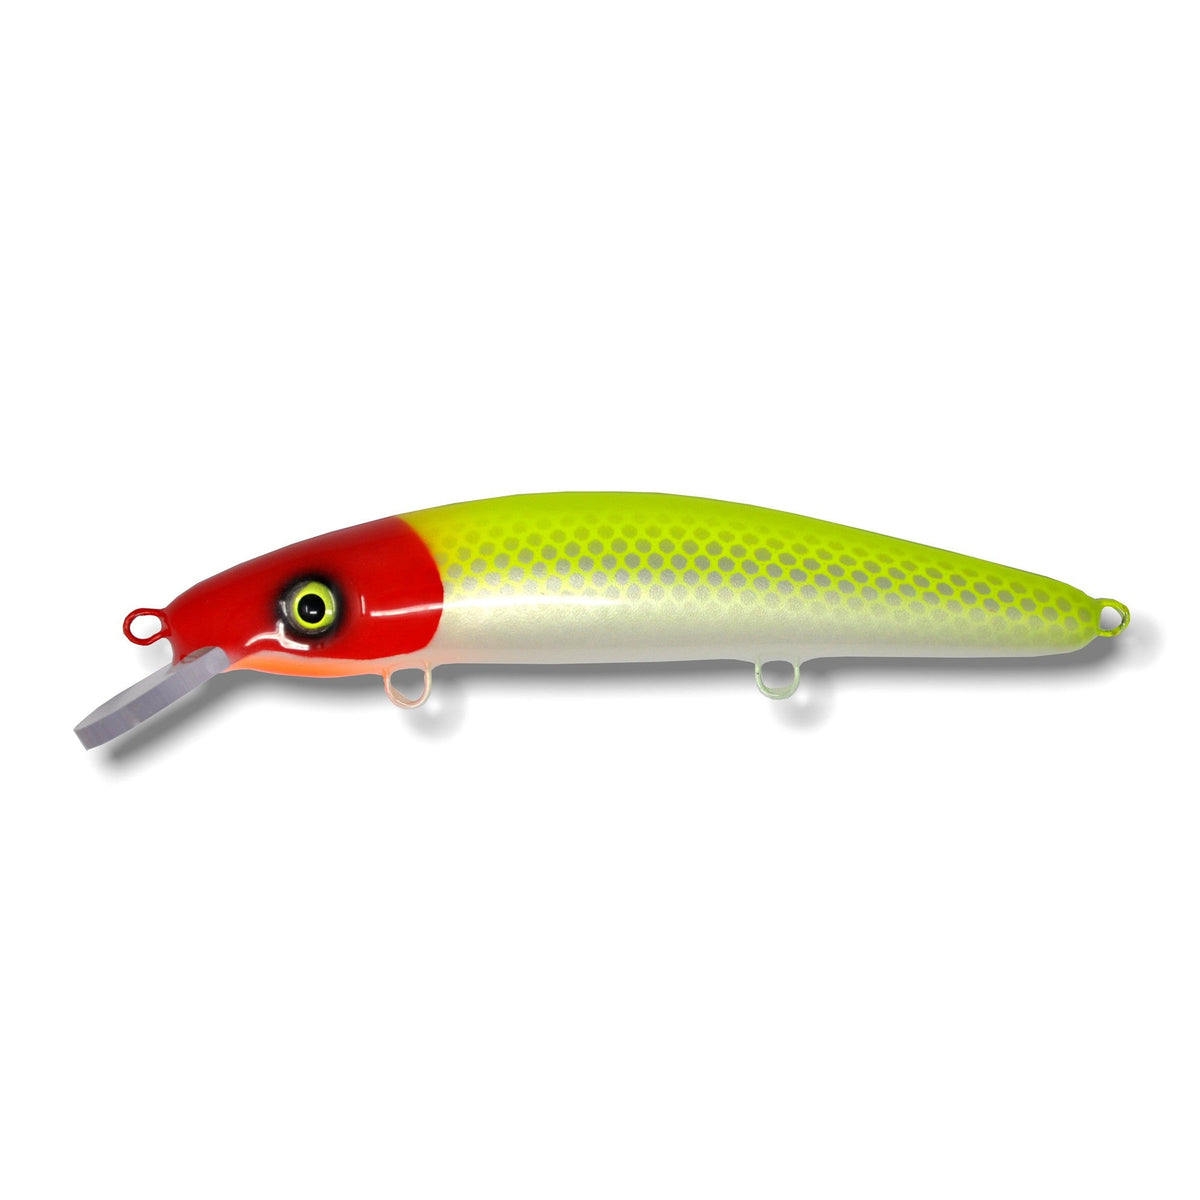 View of Crankbaits Blue Water Baits 9" cisco - shallow Crankbait Clown / White Belly available at EZOKO Pike and Musky Shop